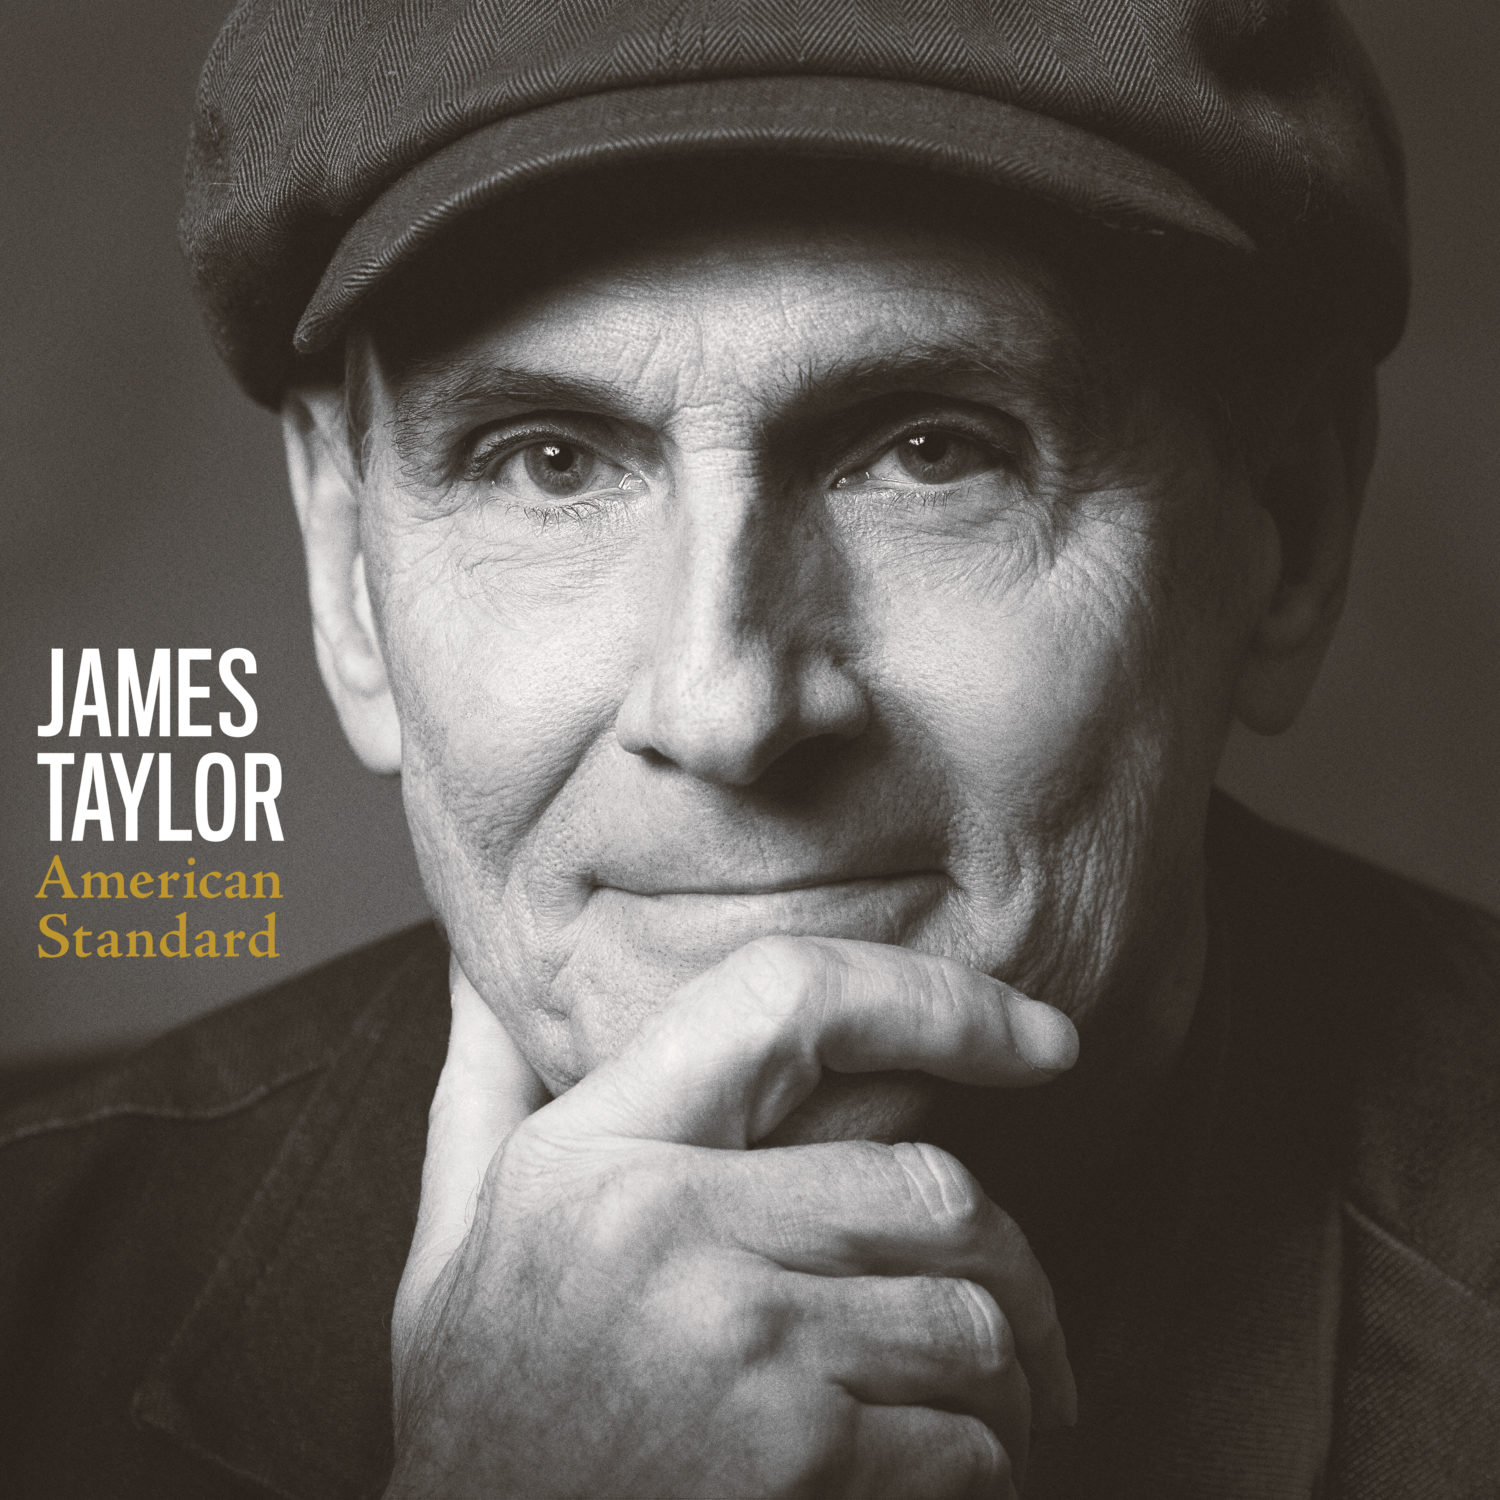 LEGENDARY SINGERSONGWRITER JAMES TAYLOR TO RELEASE NEW ALBUM AMERICAN